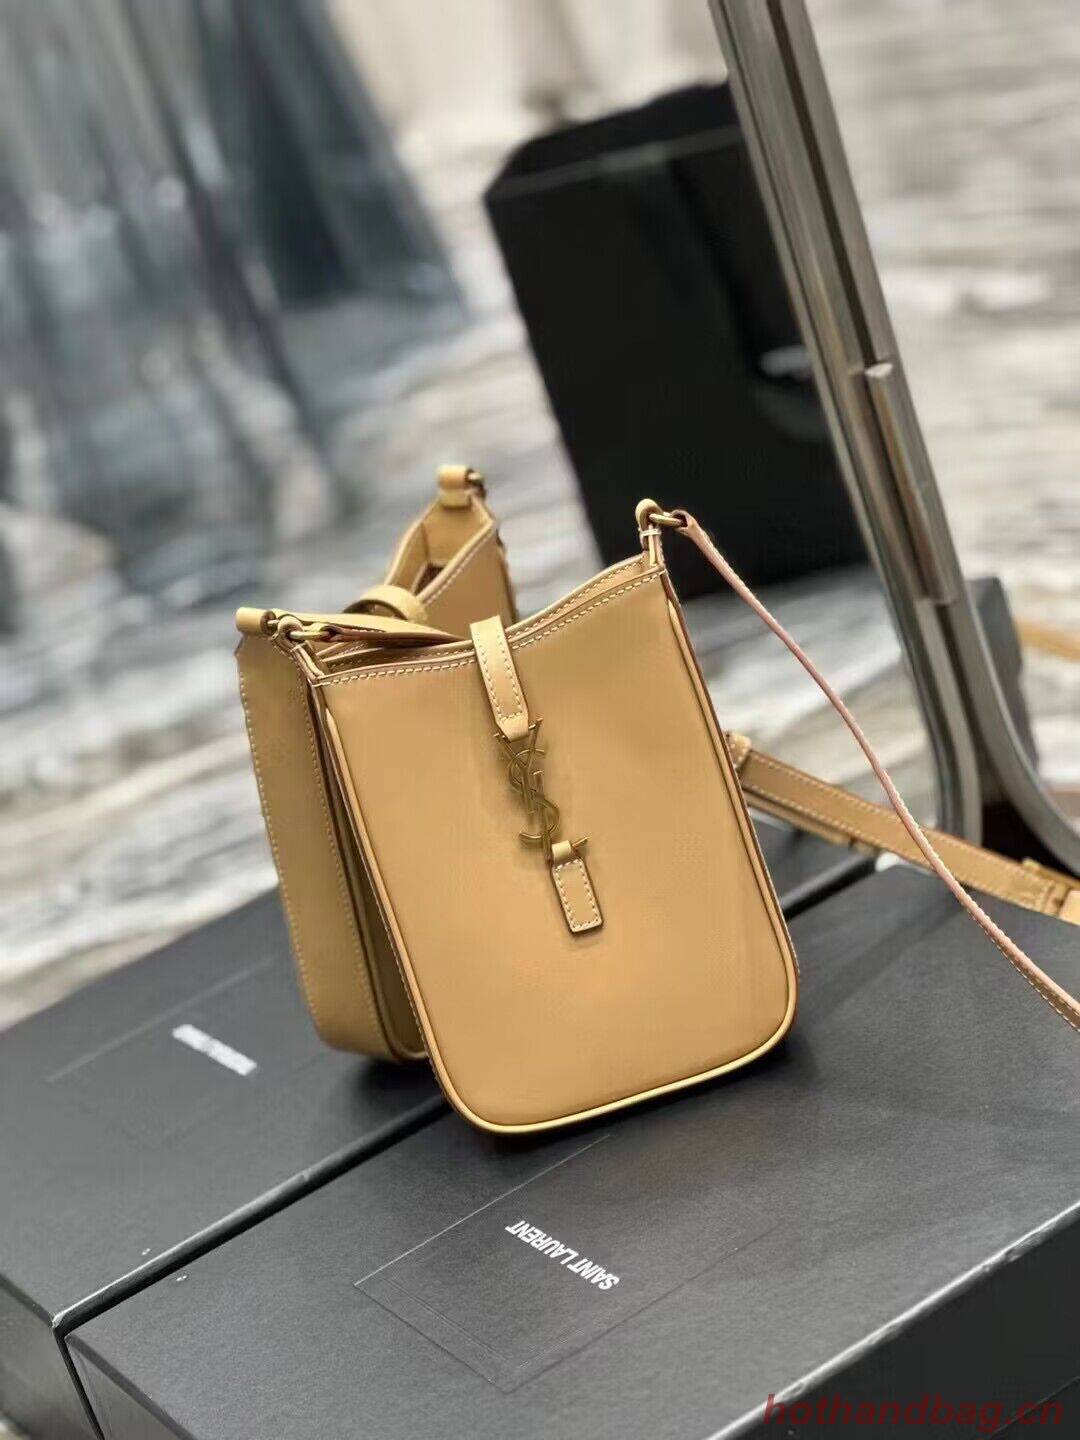 SAINT LAURENT LE 5 A 7 MINI VERTICAL IN SHINY LEATHER 7352142 BROWN GOLD